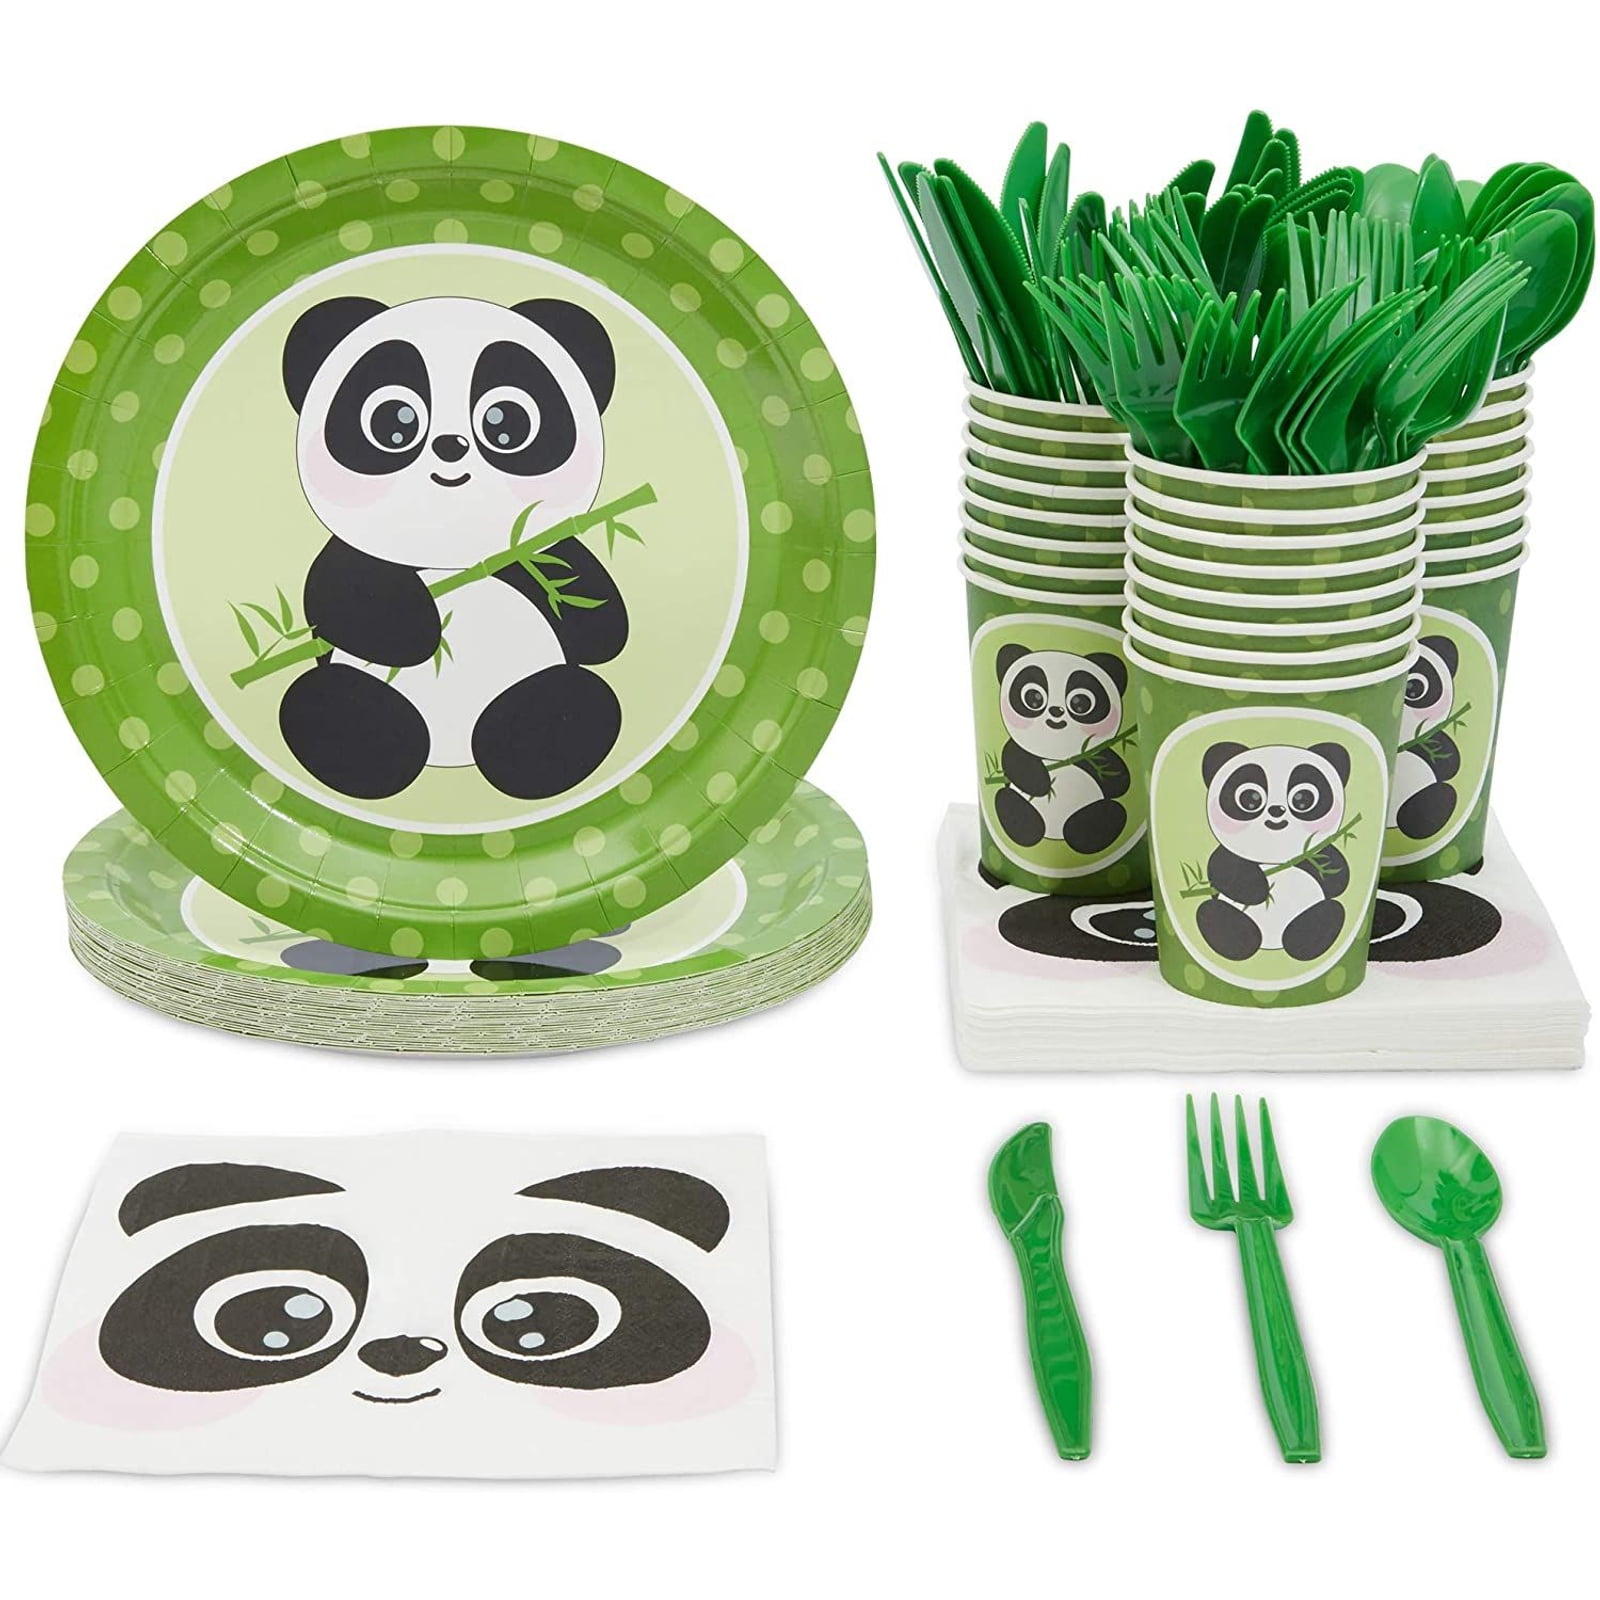 Gift Bags Panda Cupcake Toppers for Children Birthday Party Kids Nursery Bedroom Décor Panda Bear Themes Happy Birthday Banner Panda Bamboo Balloons 61 Pcs Panda Birthday Party Decorations Supplies